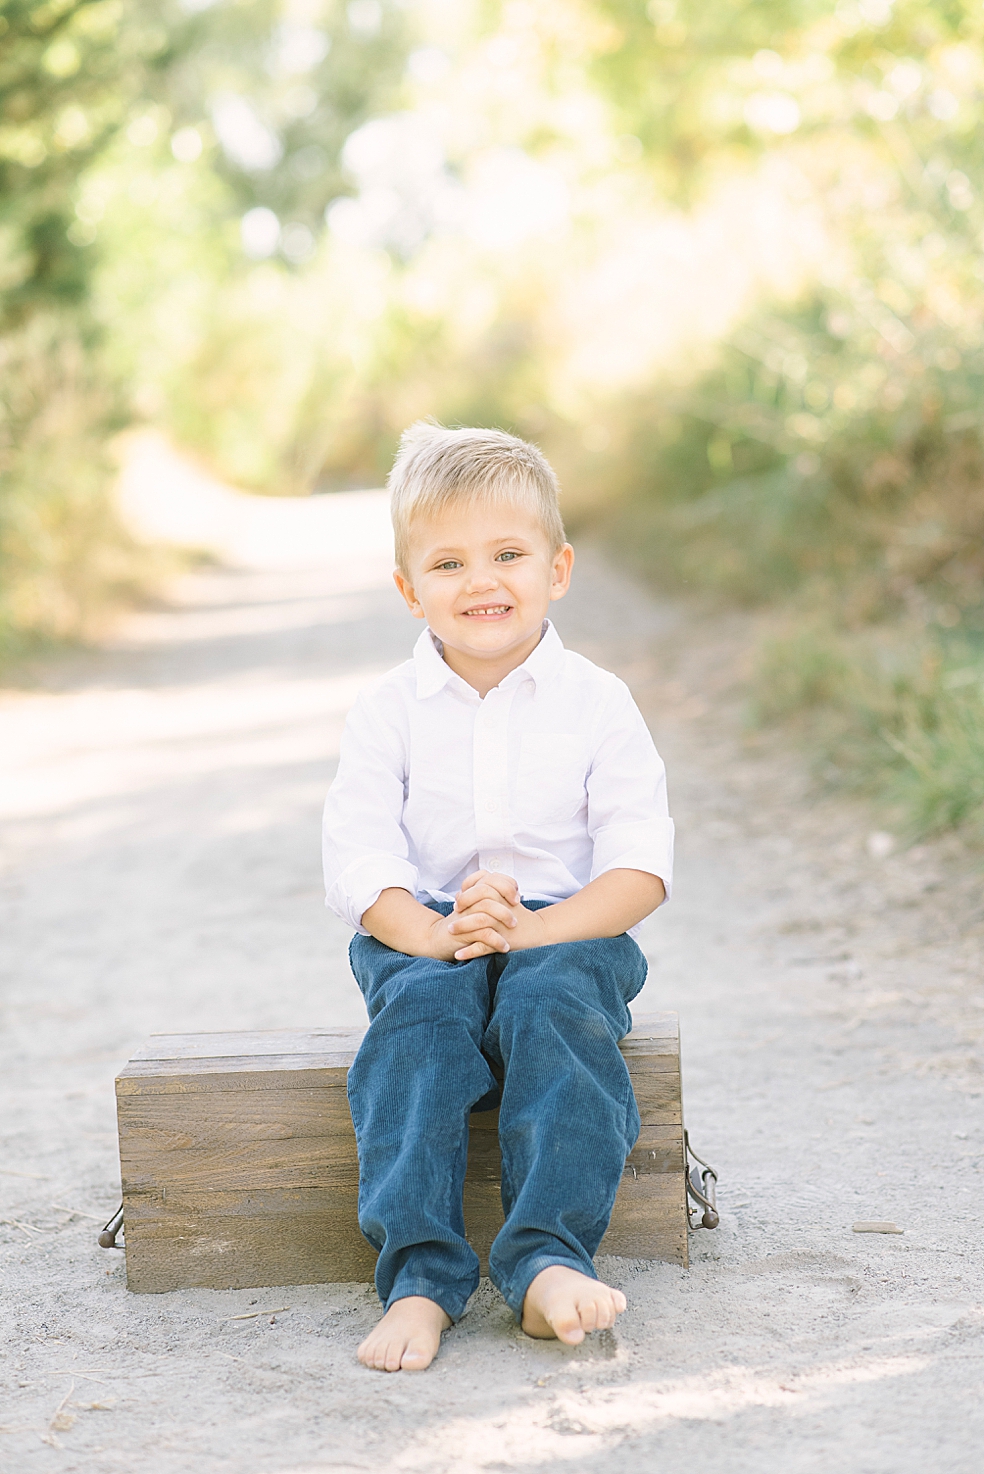 Little boy in blue and white sitting on a box on a path | Photo by Jessica Lee Photography